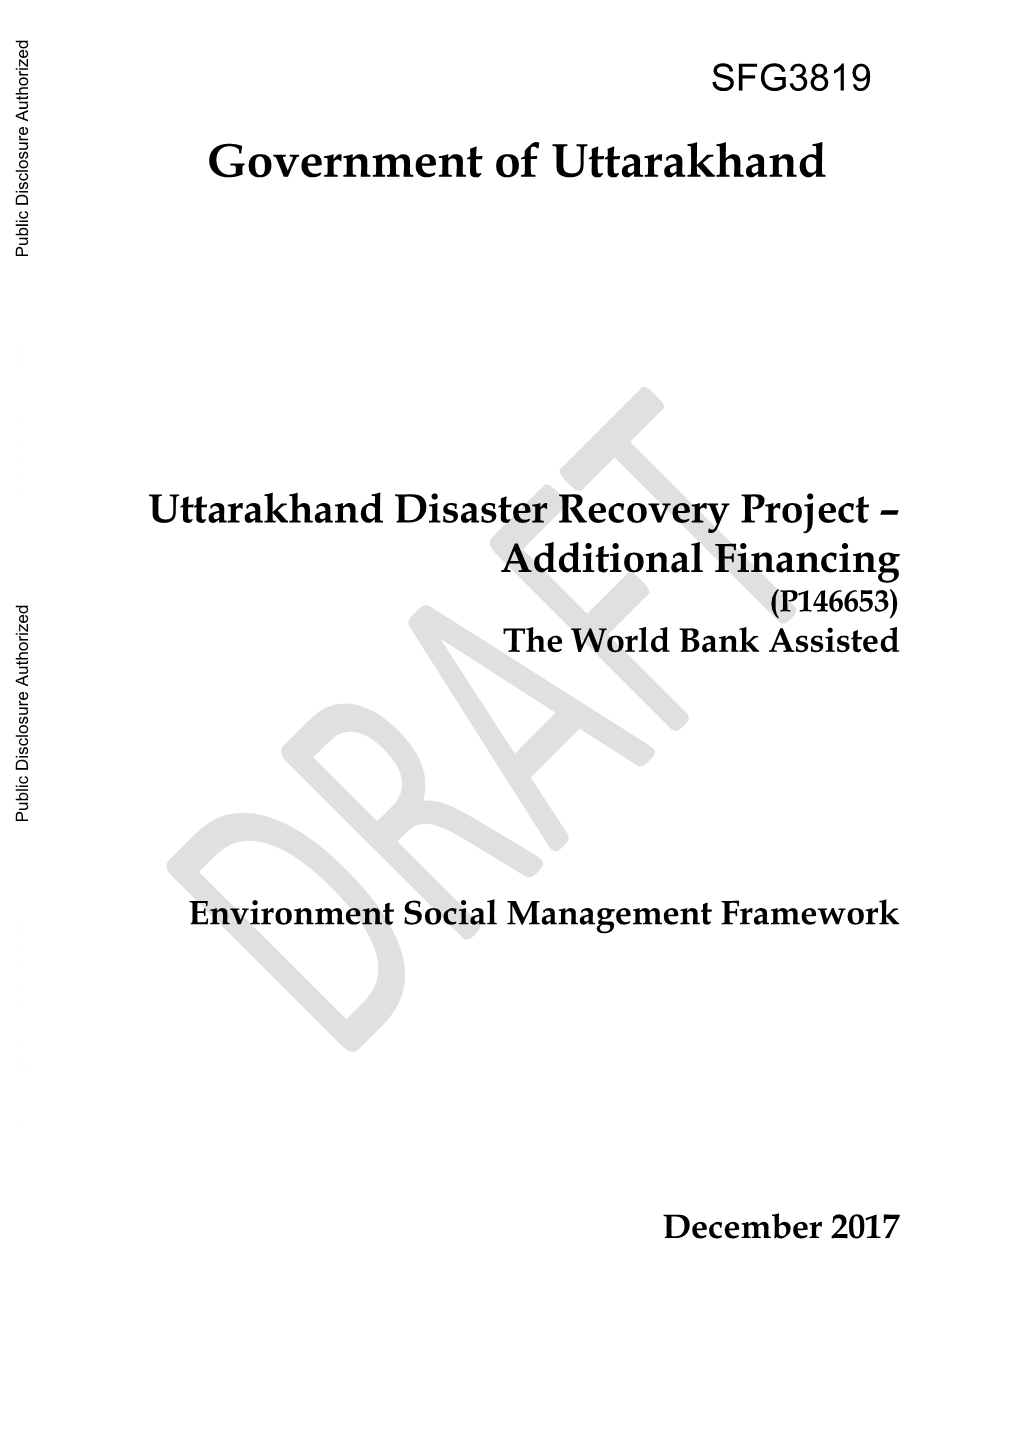 Uttarakhand Disaster Recovery Project – Public Disclosure Authorized Additional Financing (P146653) the World Bank Assisted